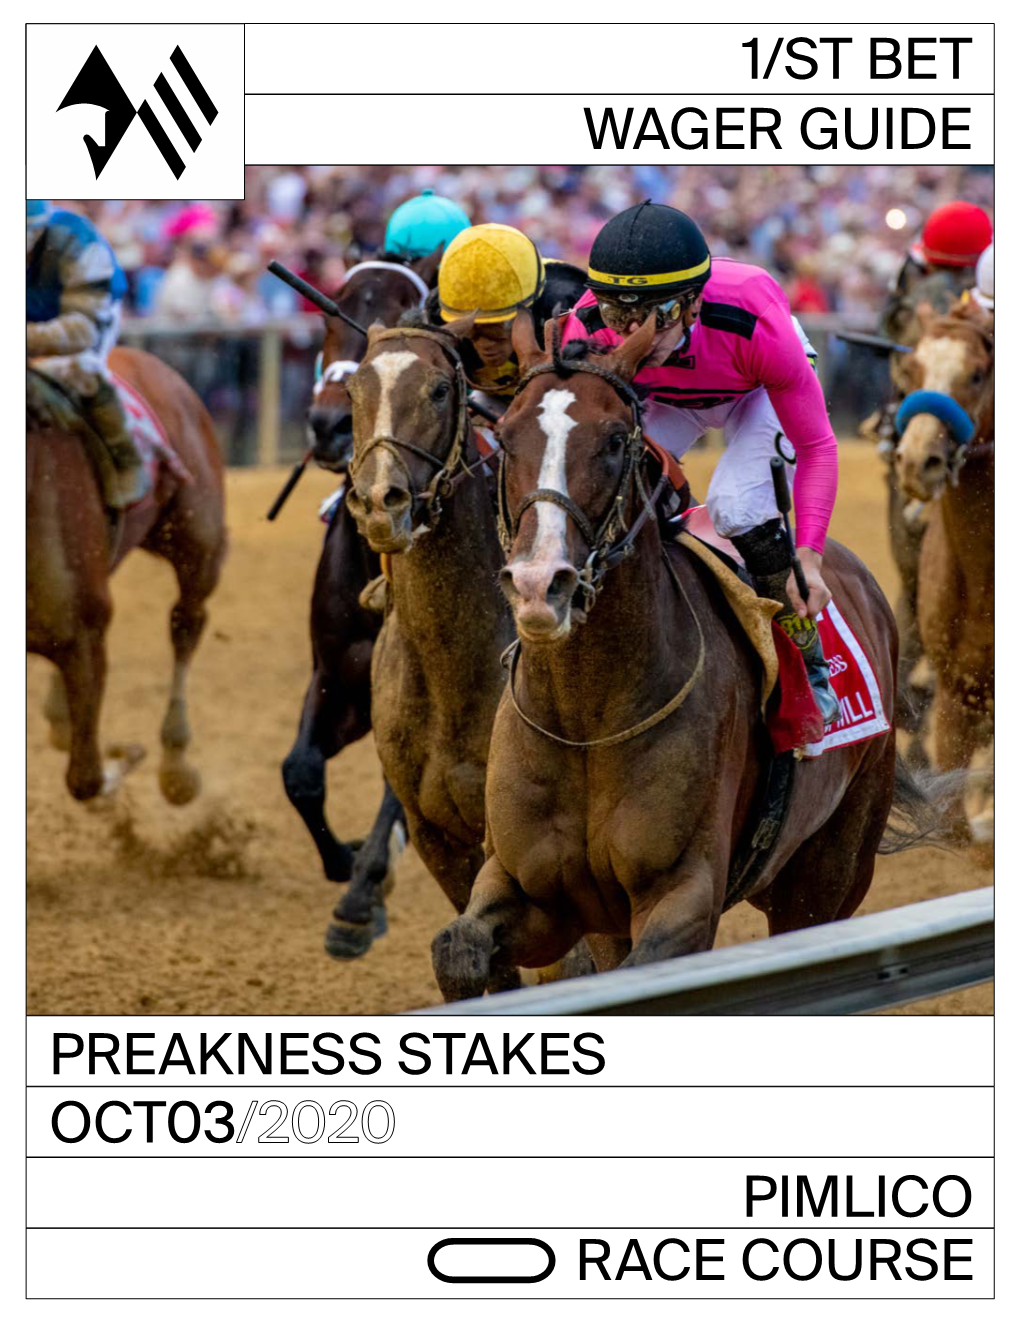 Wager Guide Pimlico Race Course Oct03 Preakness